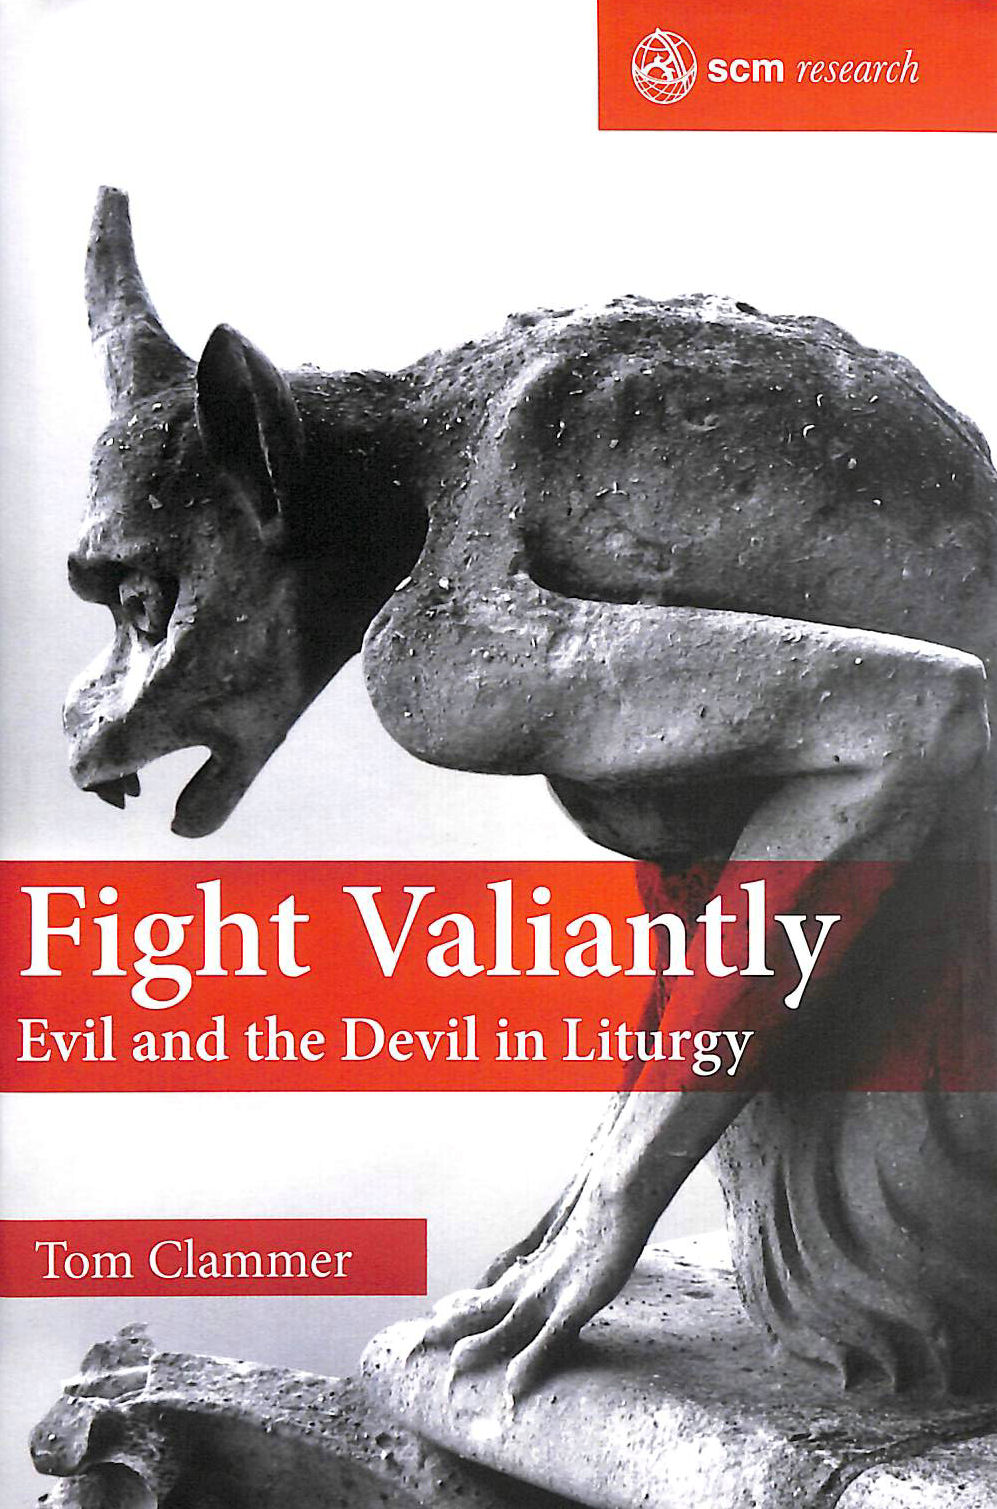 TOM CLAMMER - Fight Valiantly: Evil and the Devil in Liturgy (SCM Research)